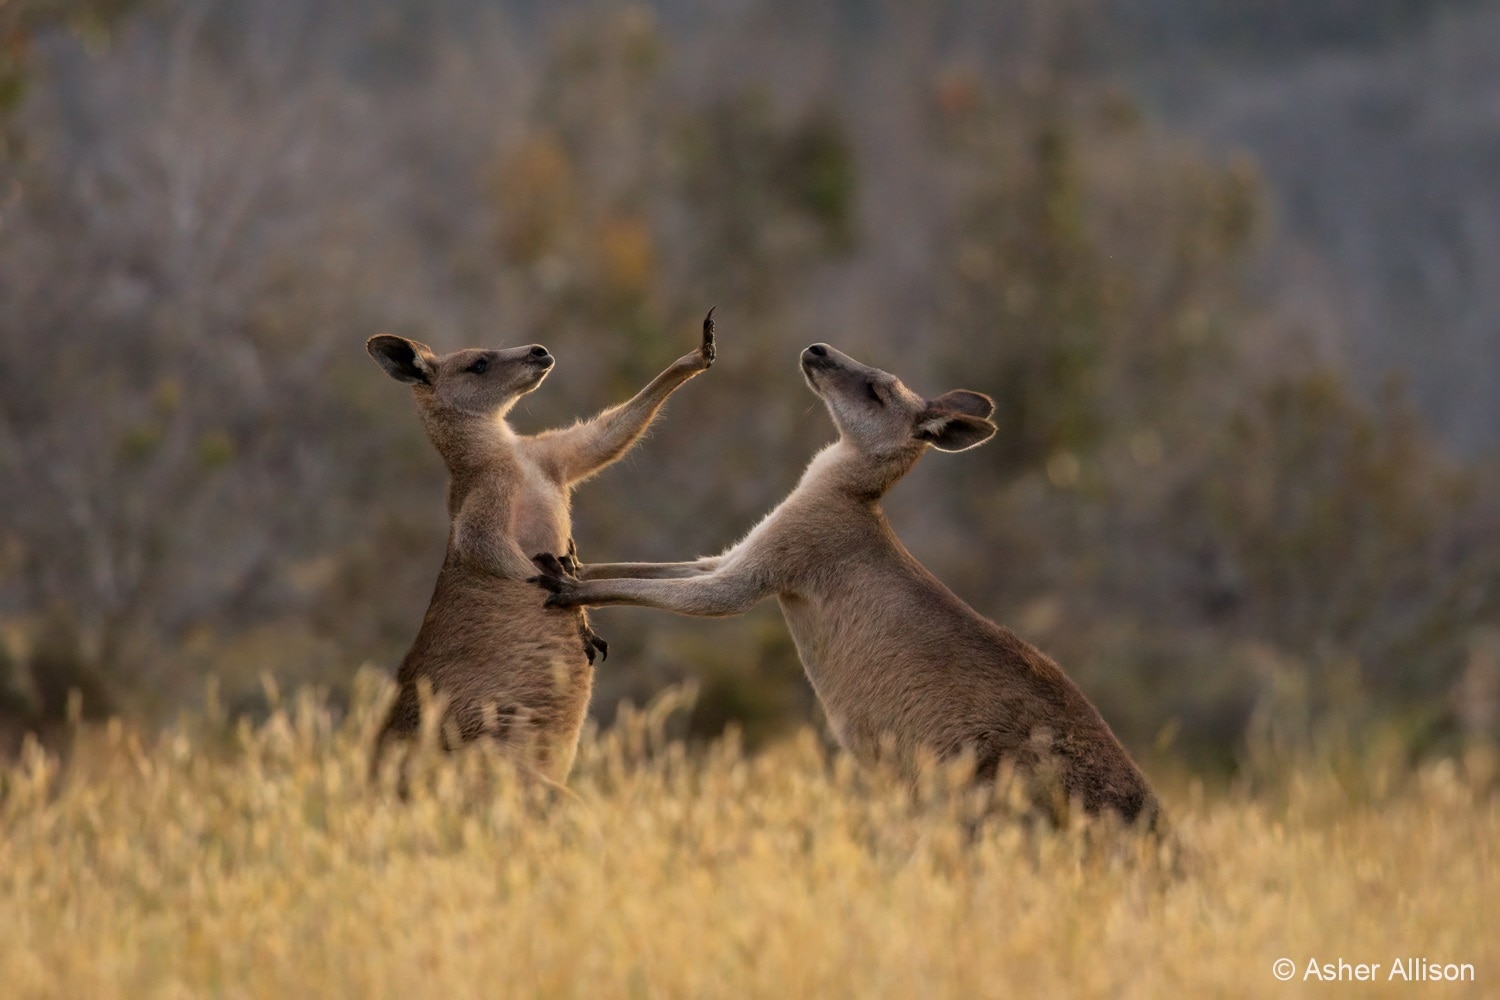 Two kangaroos fighting against each other